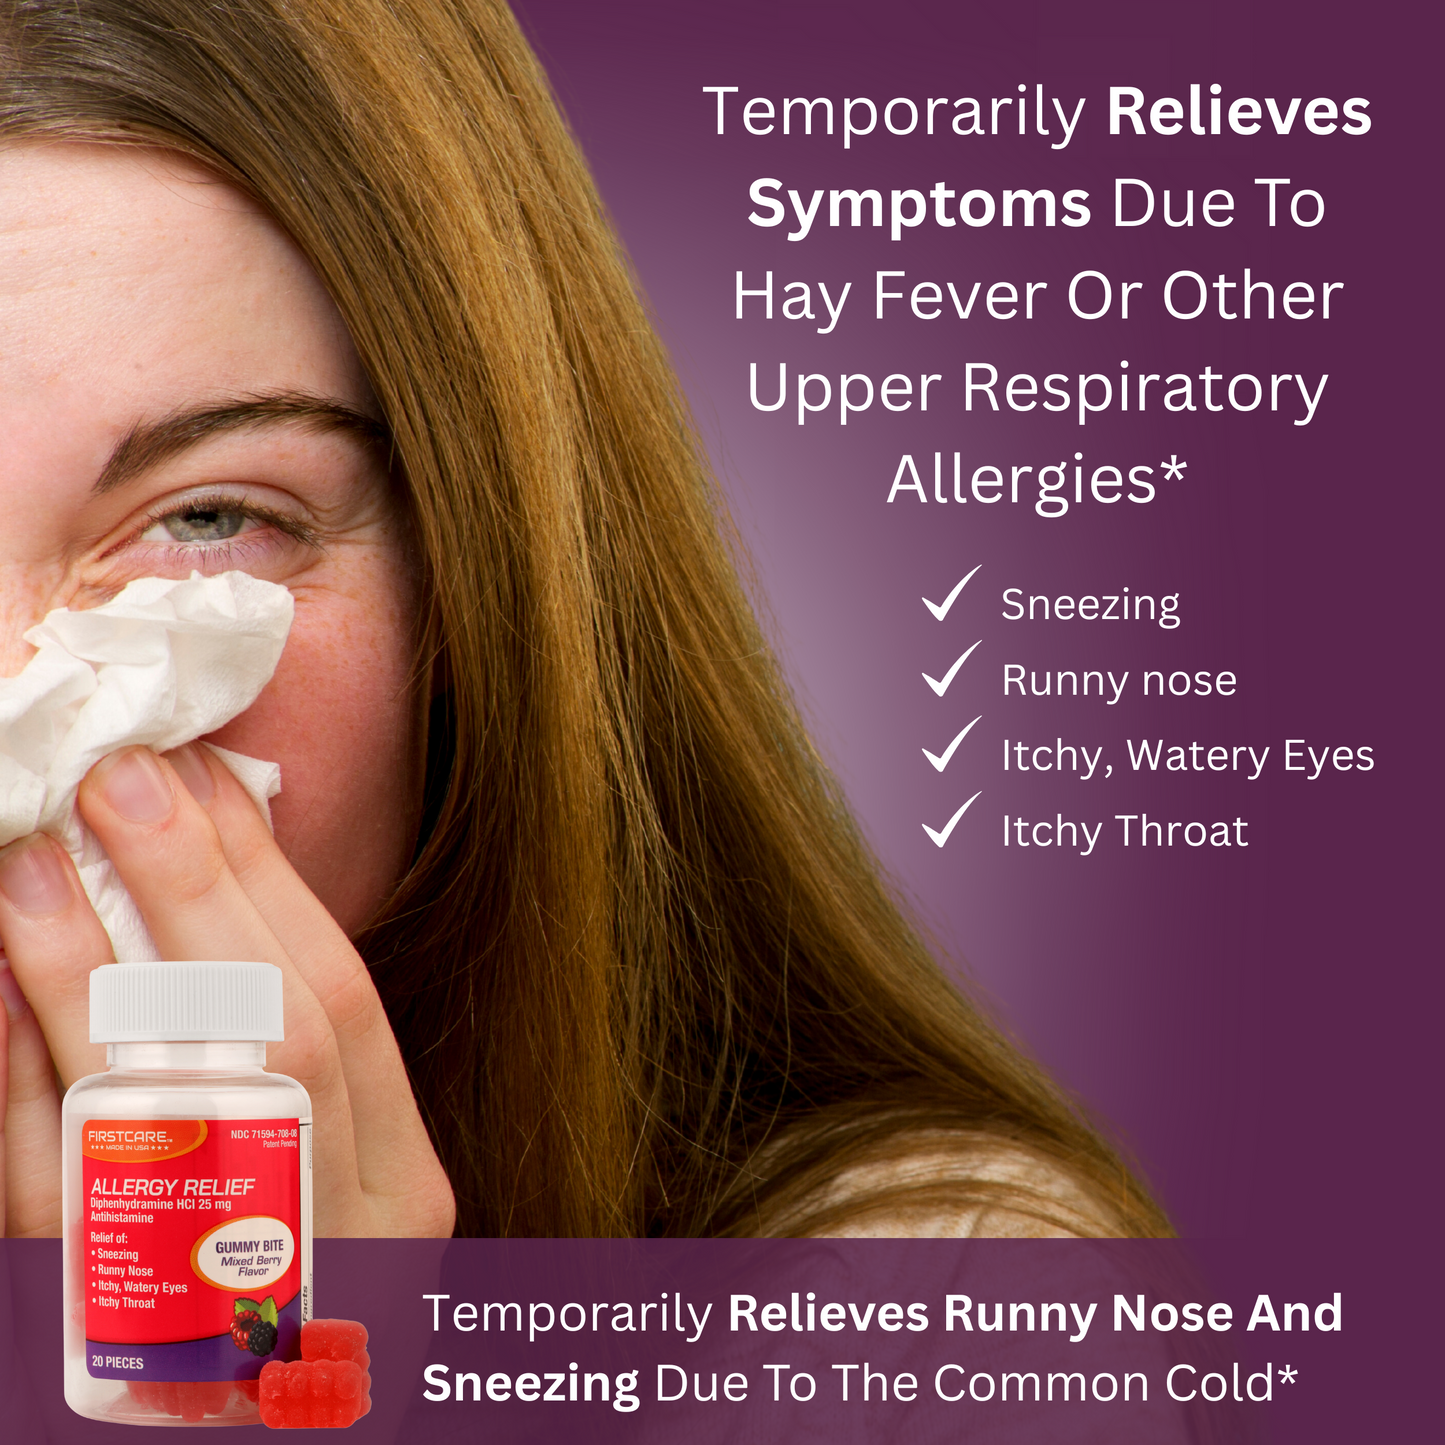 Firstcare allergy soft chew temporarily relieves symptoms due to hay fever or other upper respiratory allergies like sneezing, runny nose, itchy, watery eyes, and itchy throat. Temporarily relieves runny nose and sneezing due to the common cold.